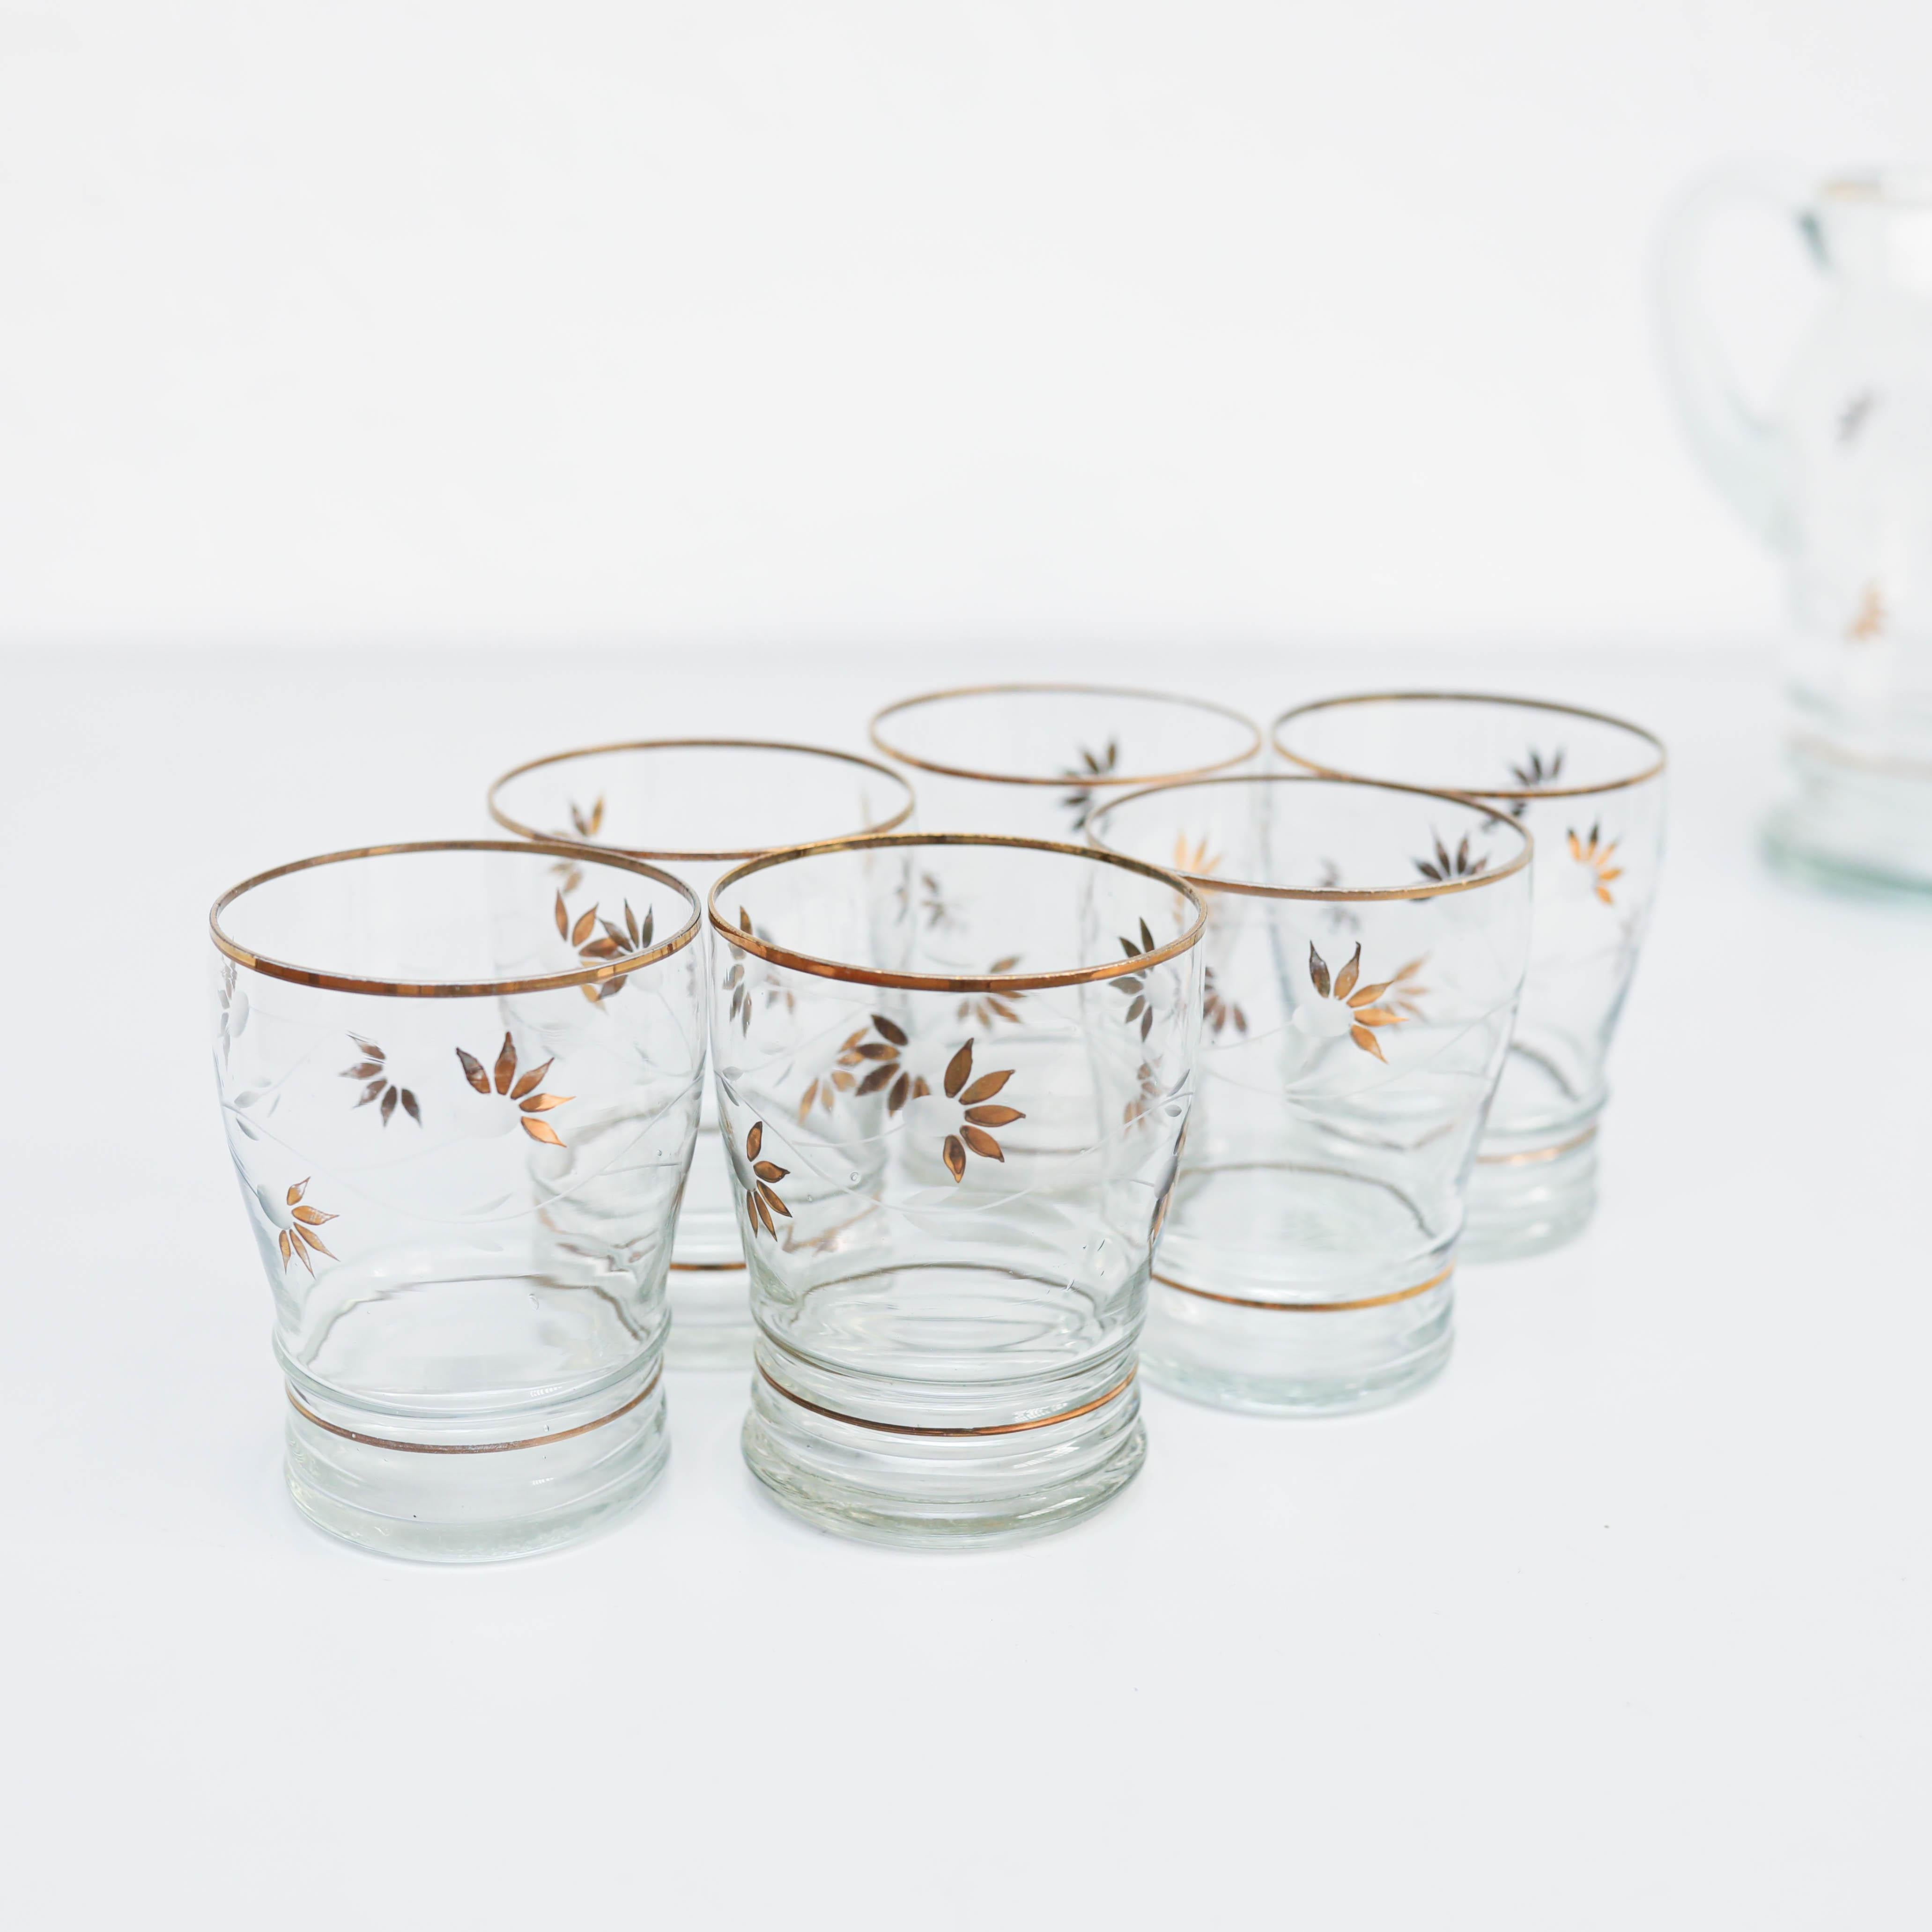  Set of Seven Antique Glass Vase and glasses, circa 1970 For Sale 6